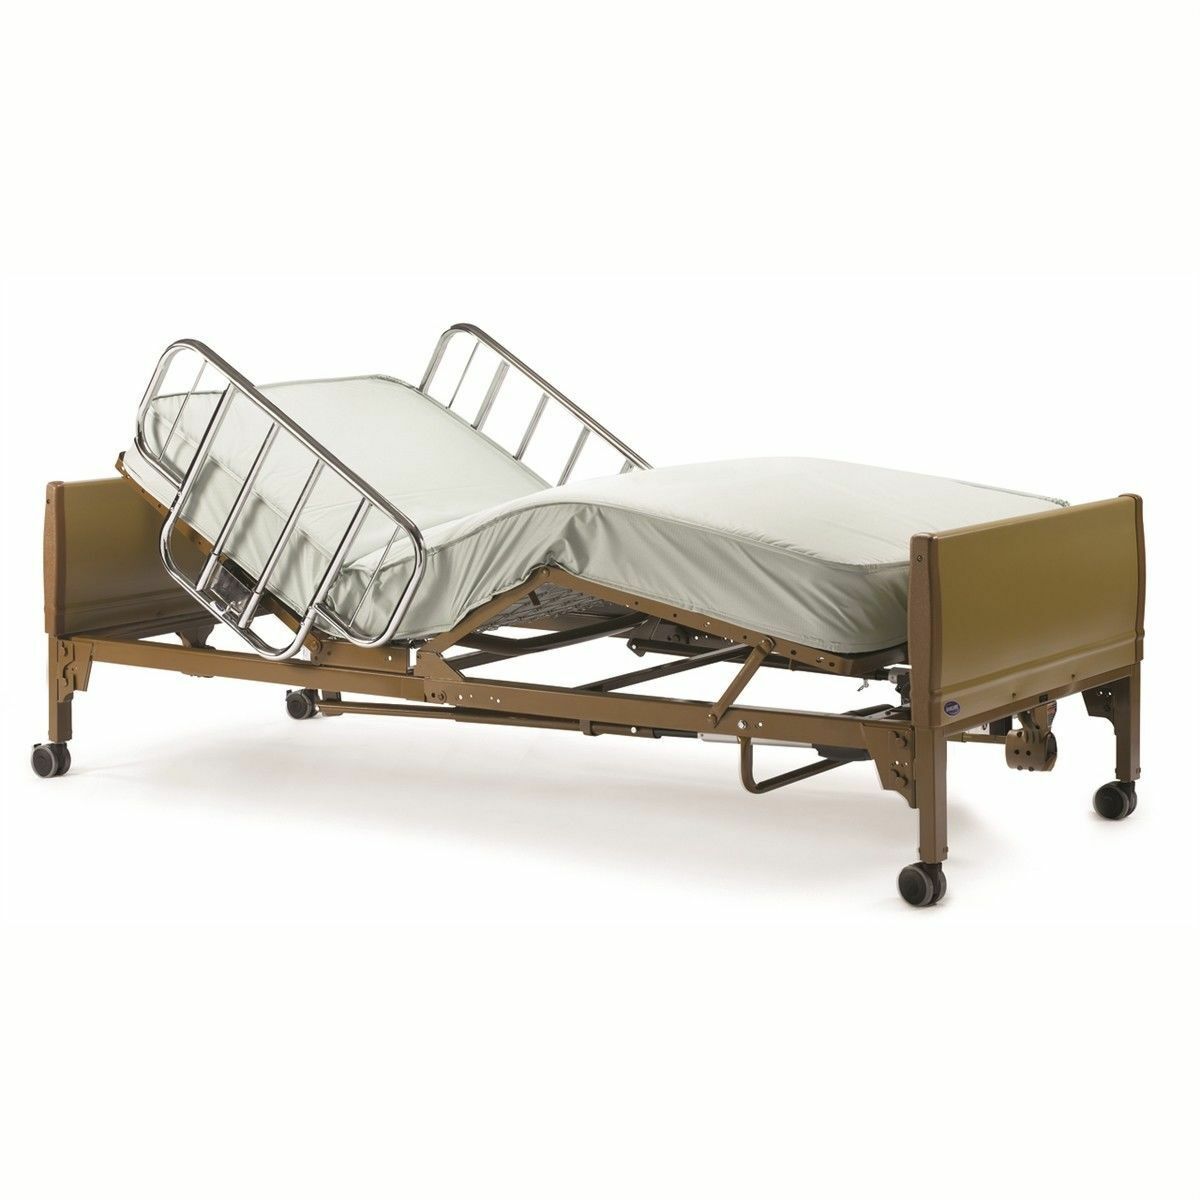 NEW Full Electric Hospital Bed Package  Includes (Free Mattress and Rails!) FREE